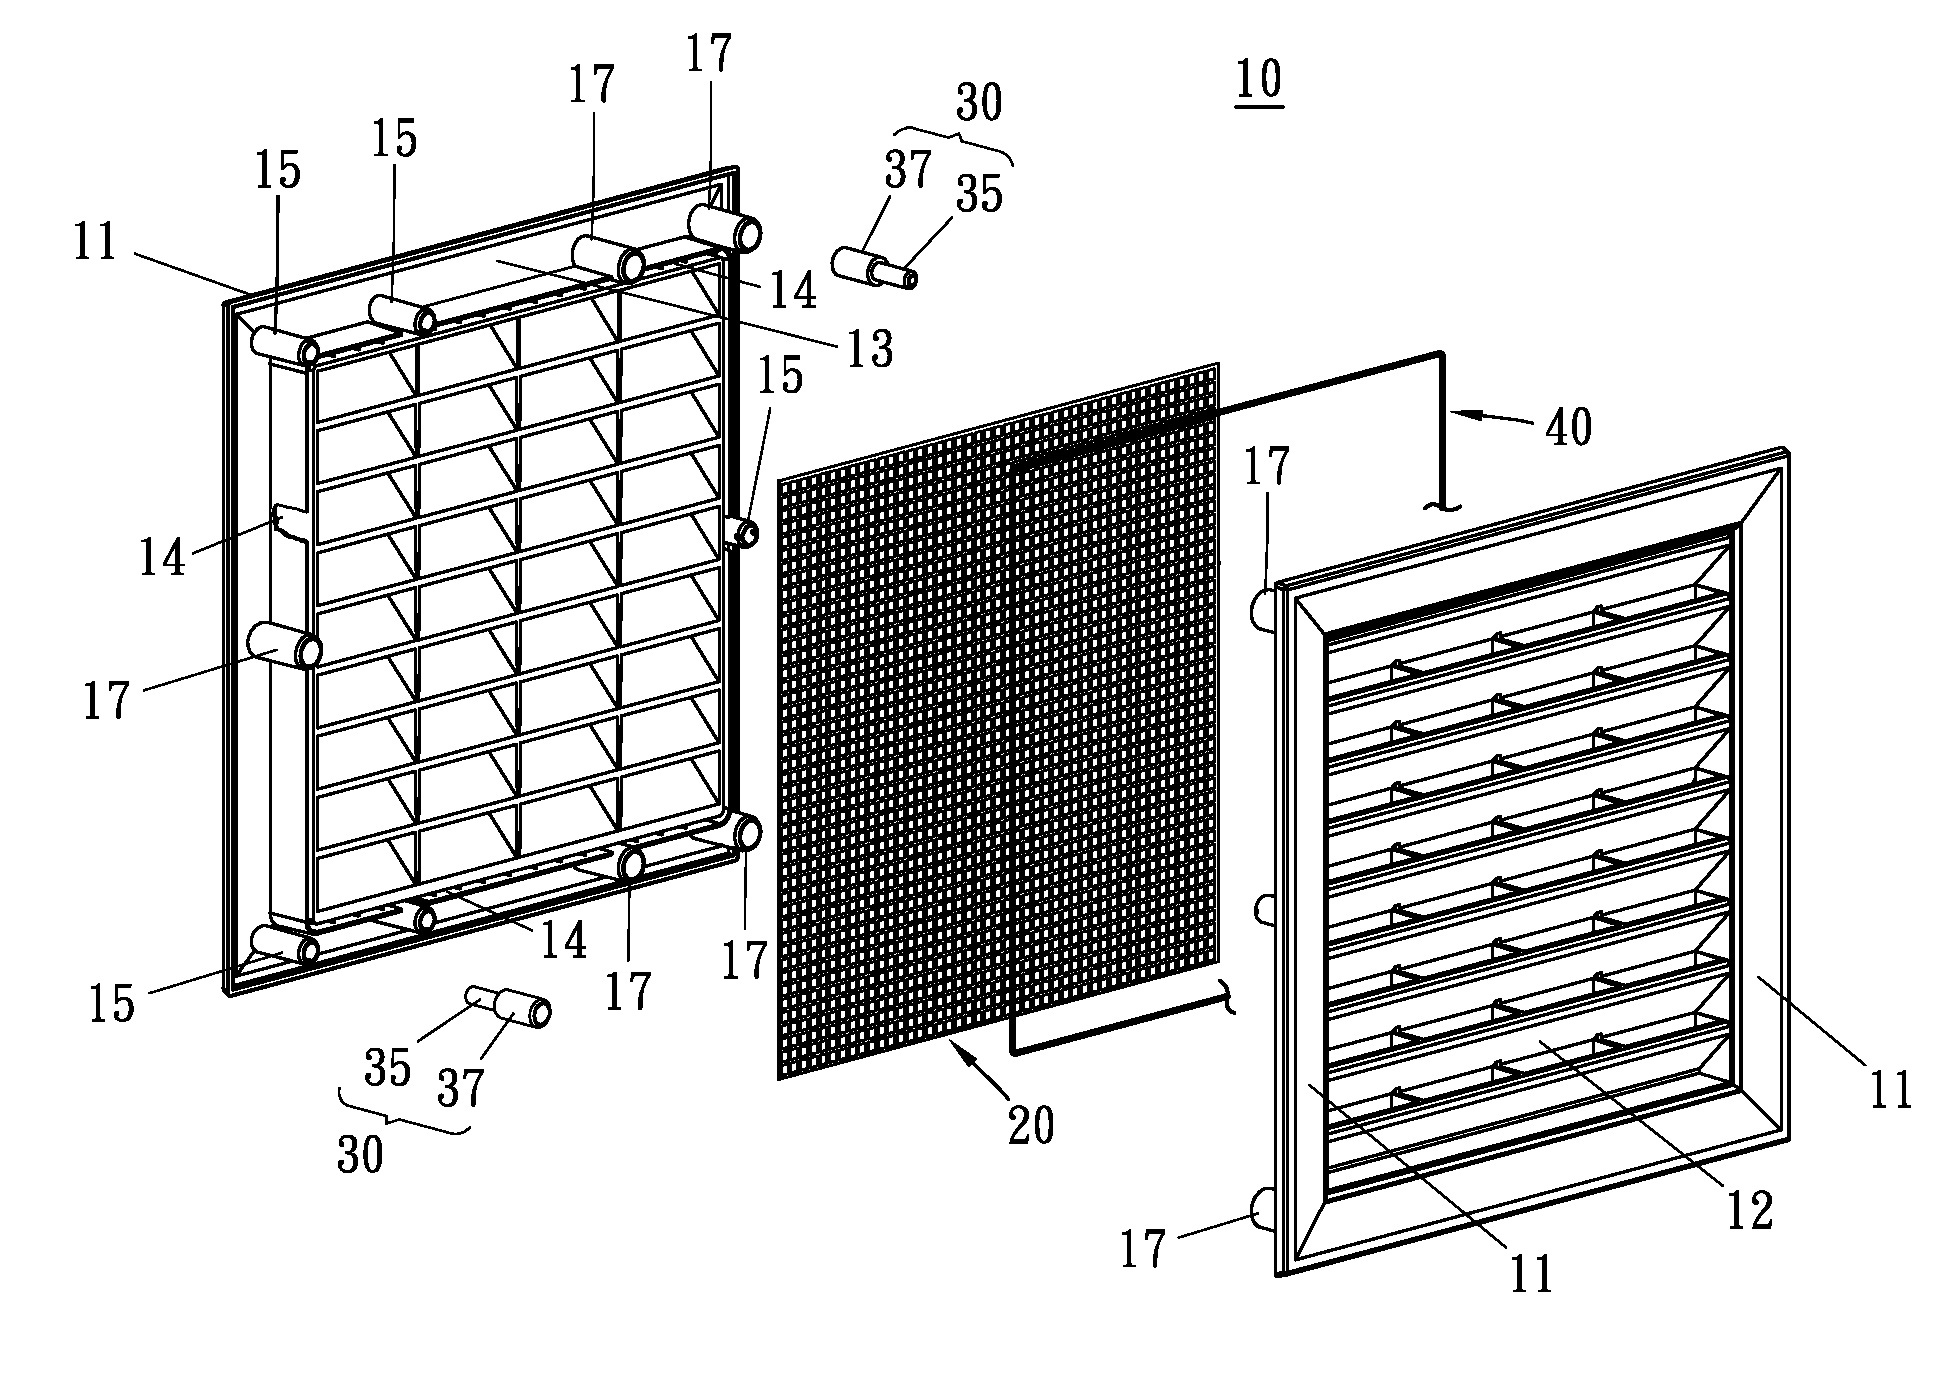 Two part grille with interlocking connections for assembly in doors or the like